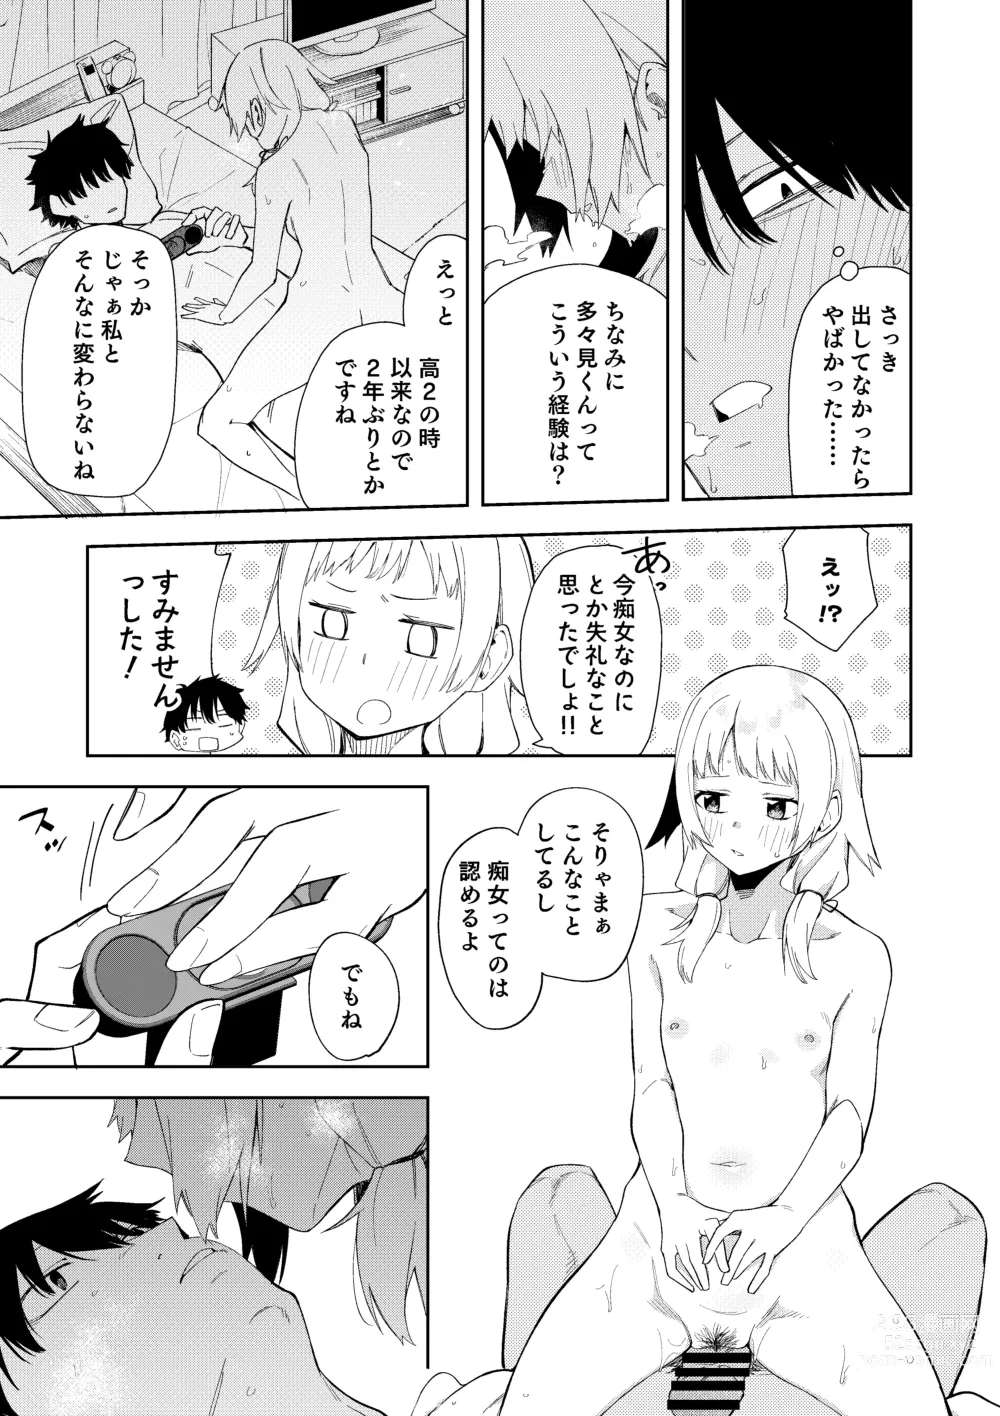 Page 24 of doujinshi 隣人は有名配信者